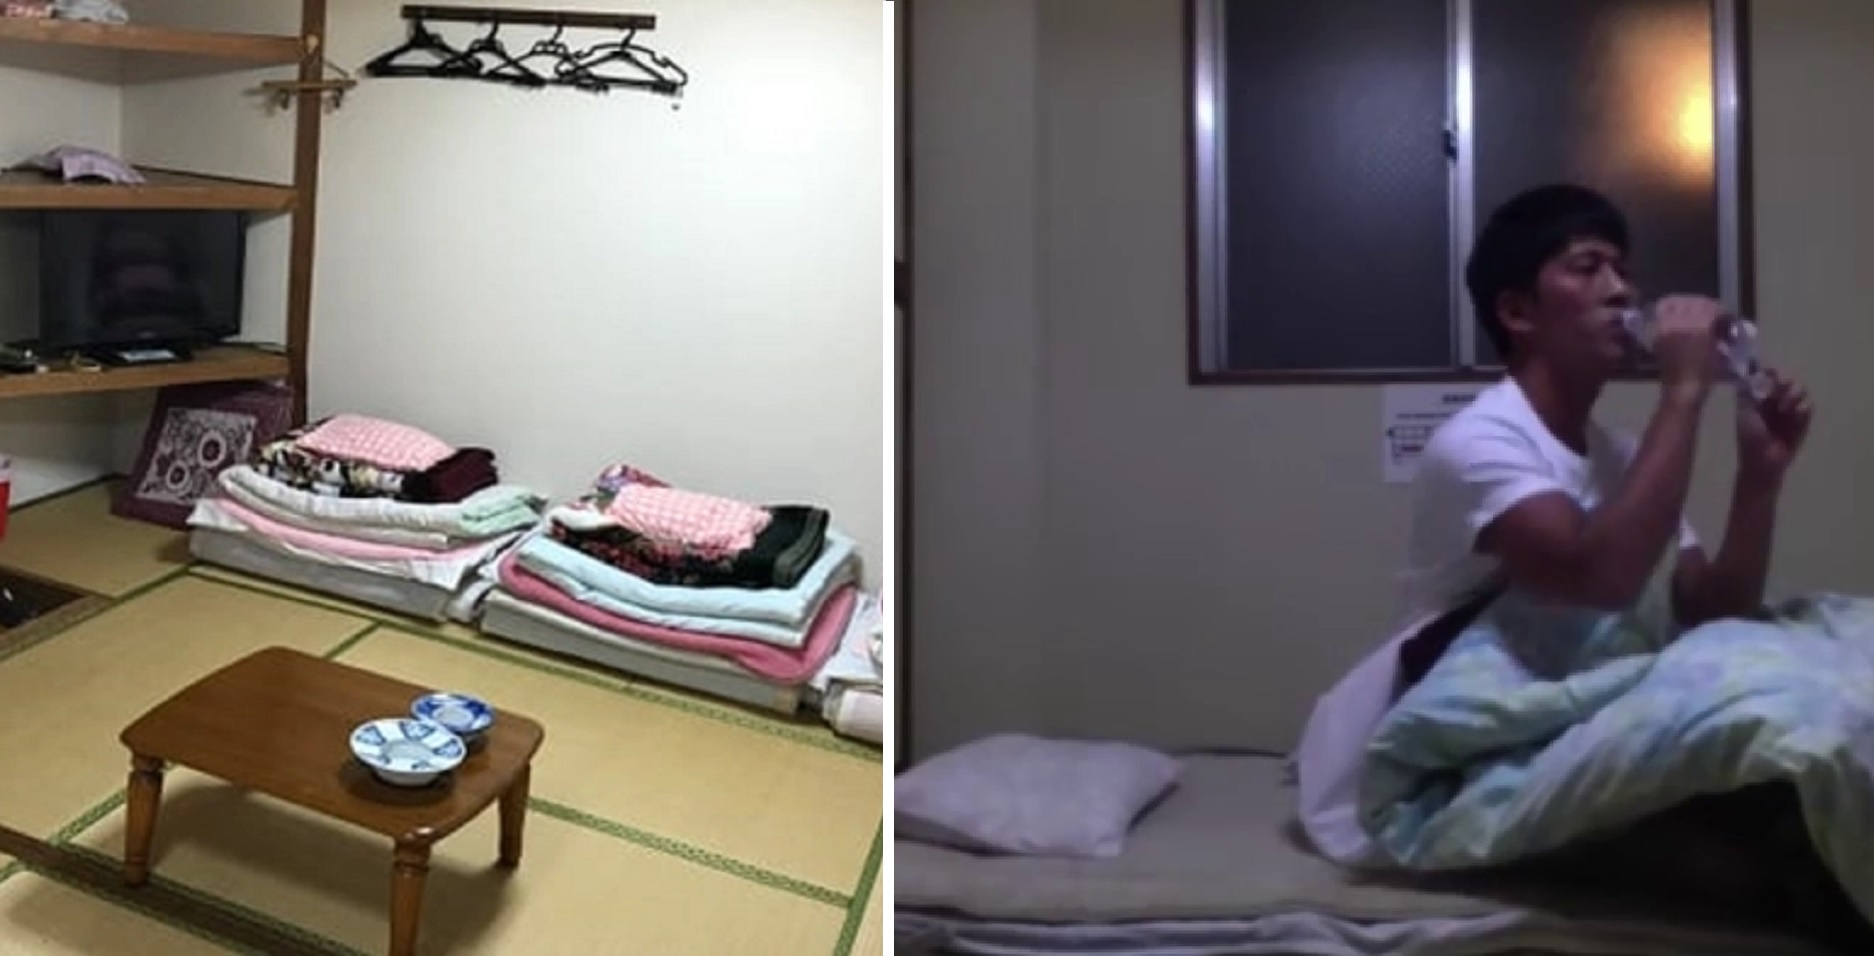 This Japanese Hotel Gives You a Room For Less Than $1 If You Allow Your Stay to Be Live-Streamed